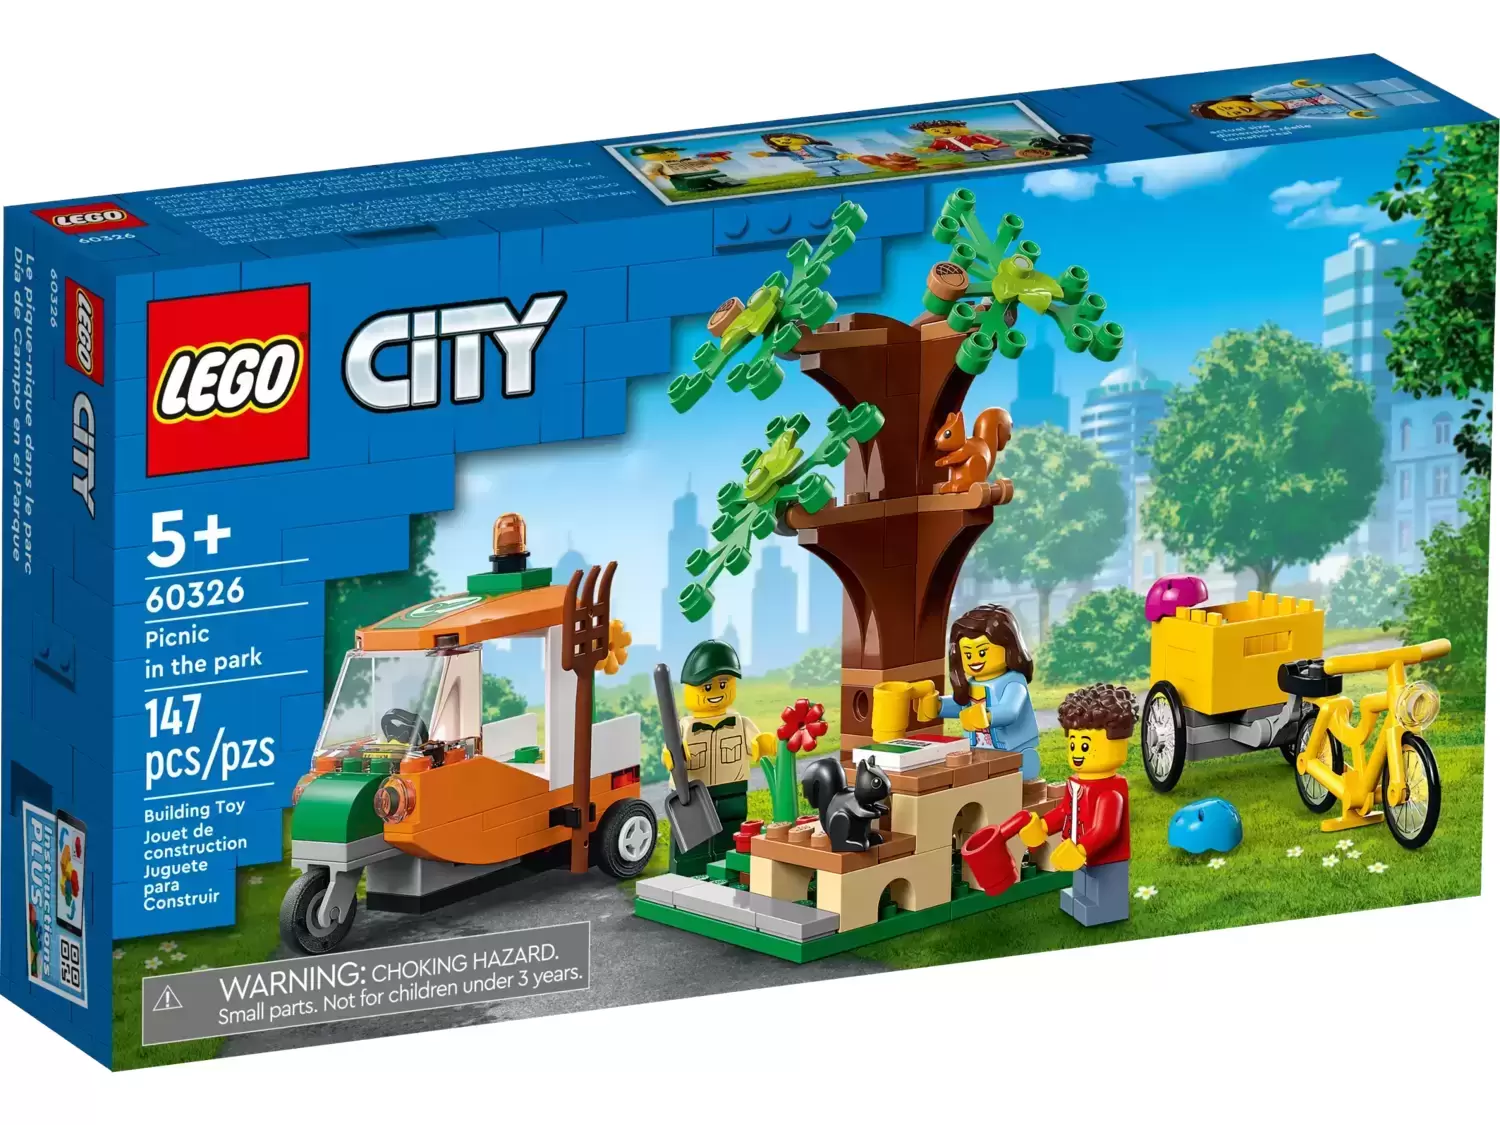 LEGO CITY - Picnic in the Park